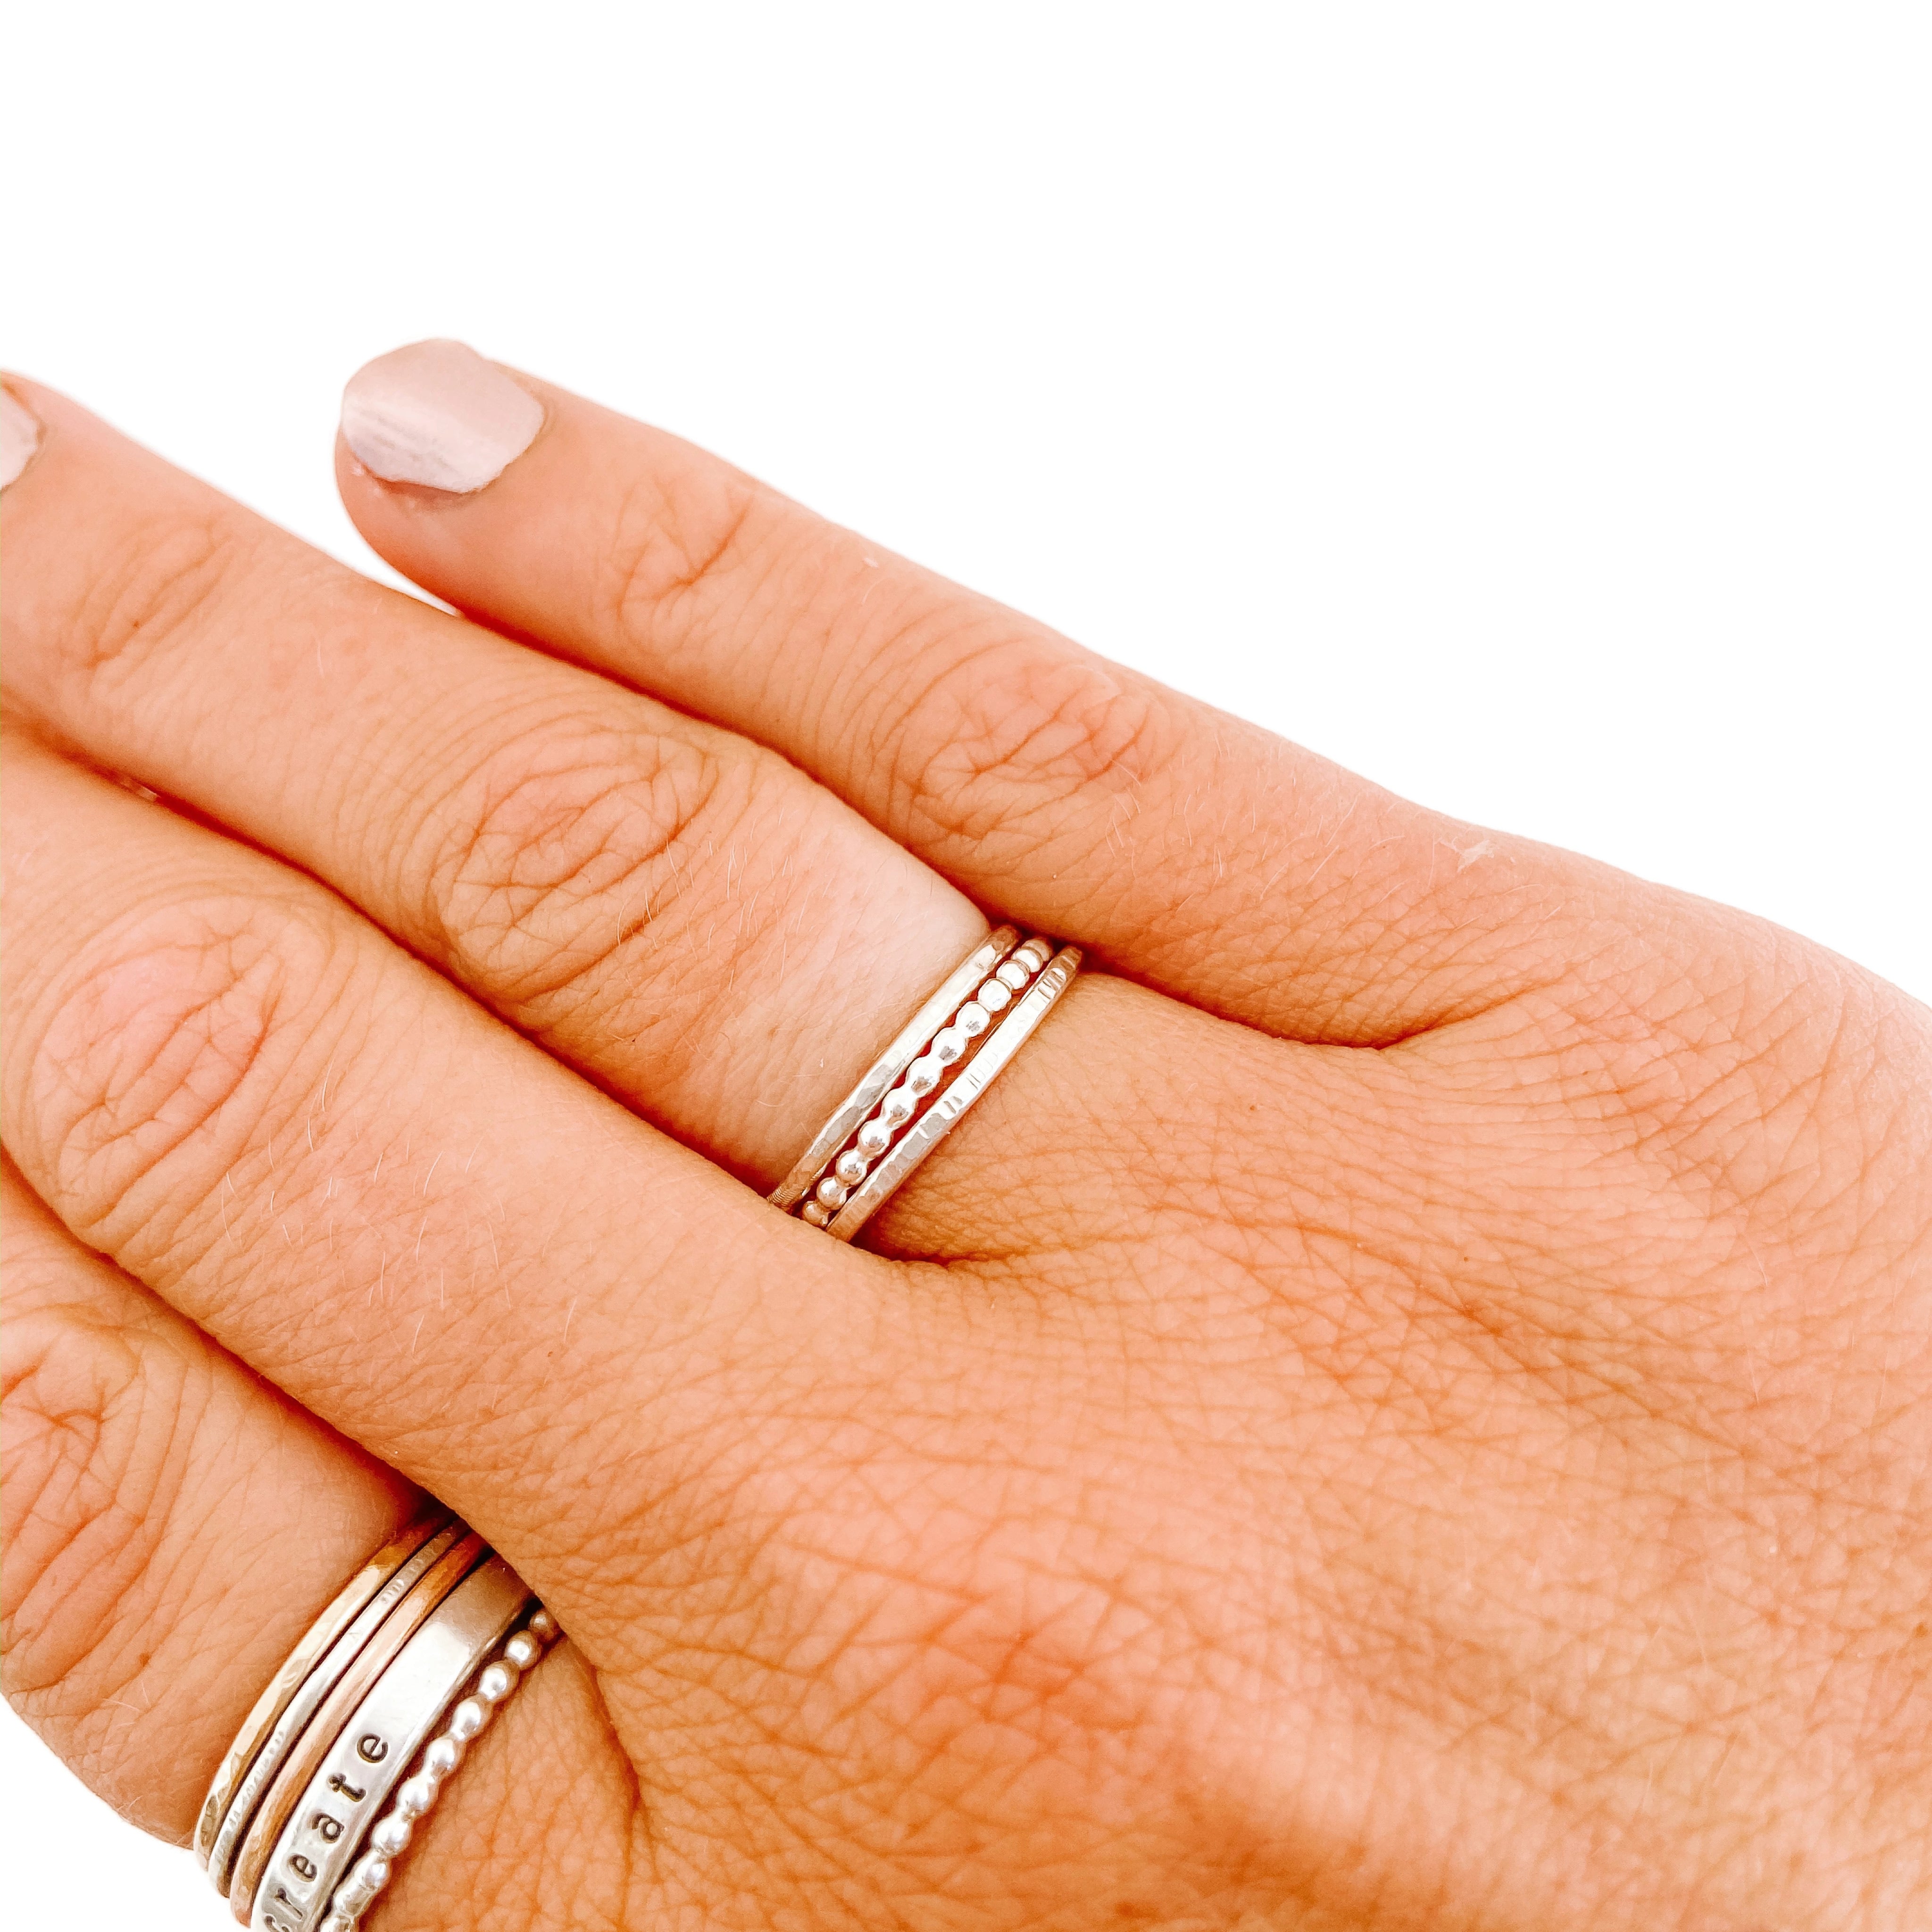 Silver Stacking Rings - mixed set of 3